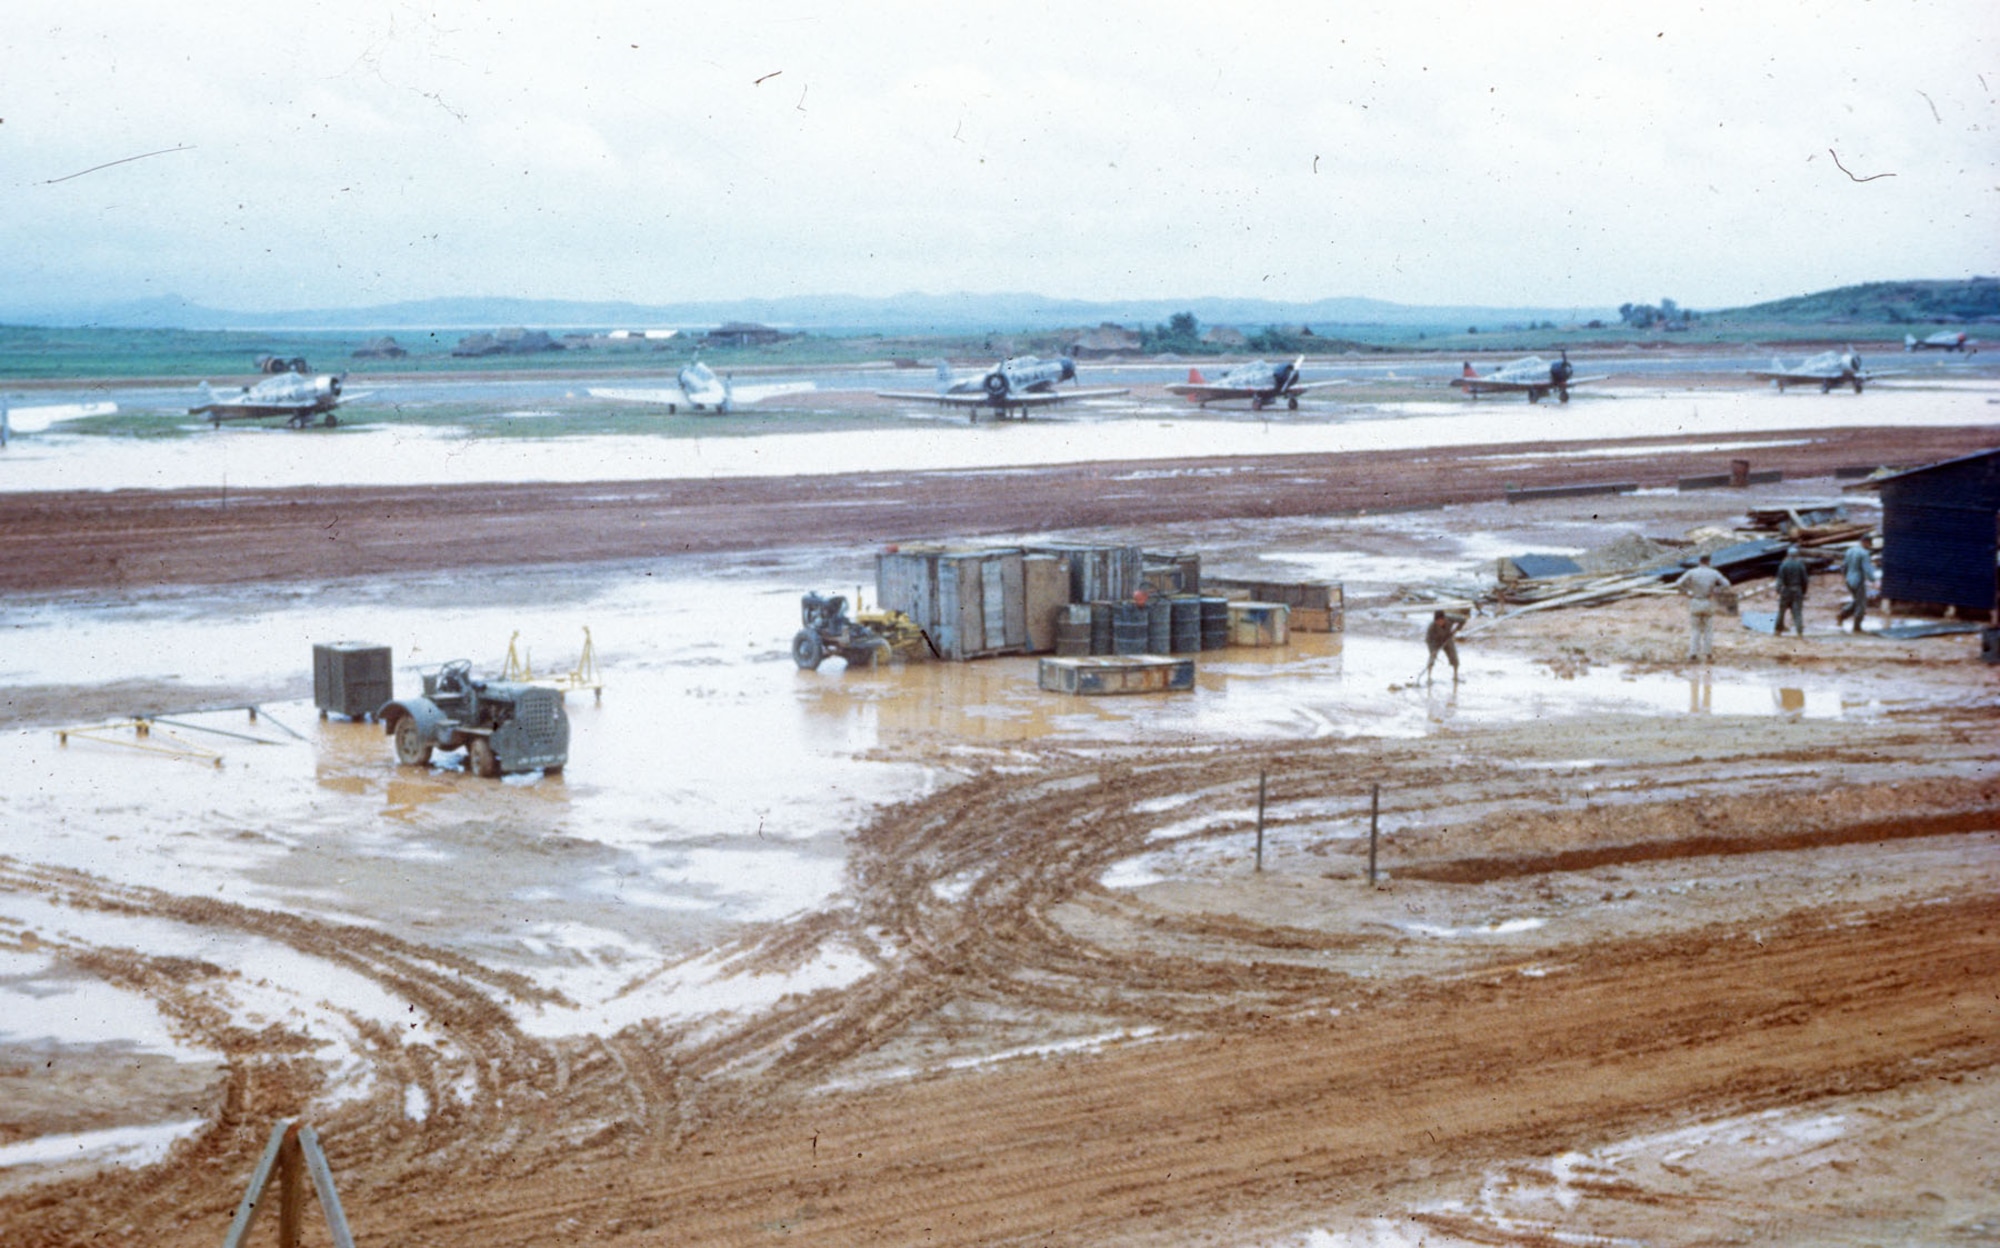 K-6 (Pyongtaek) flooded after a heavy rain in the summer of 1951. This created problems that could affect flying operations. The Airman who took this image appropriately labeled it “Dust to Mud.” (U.S. Air Force photo)